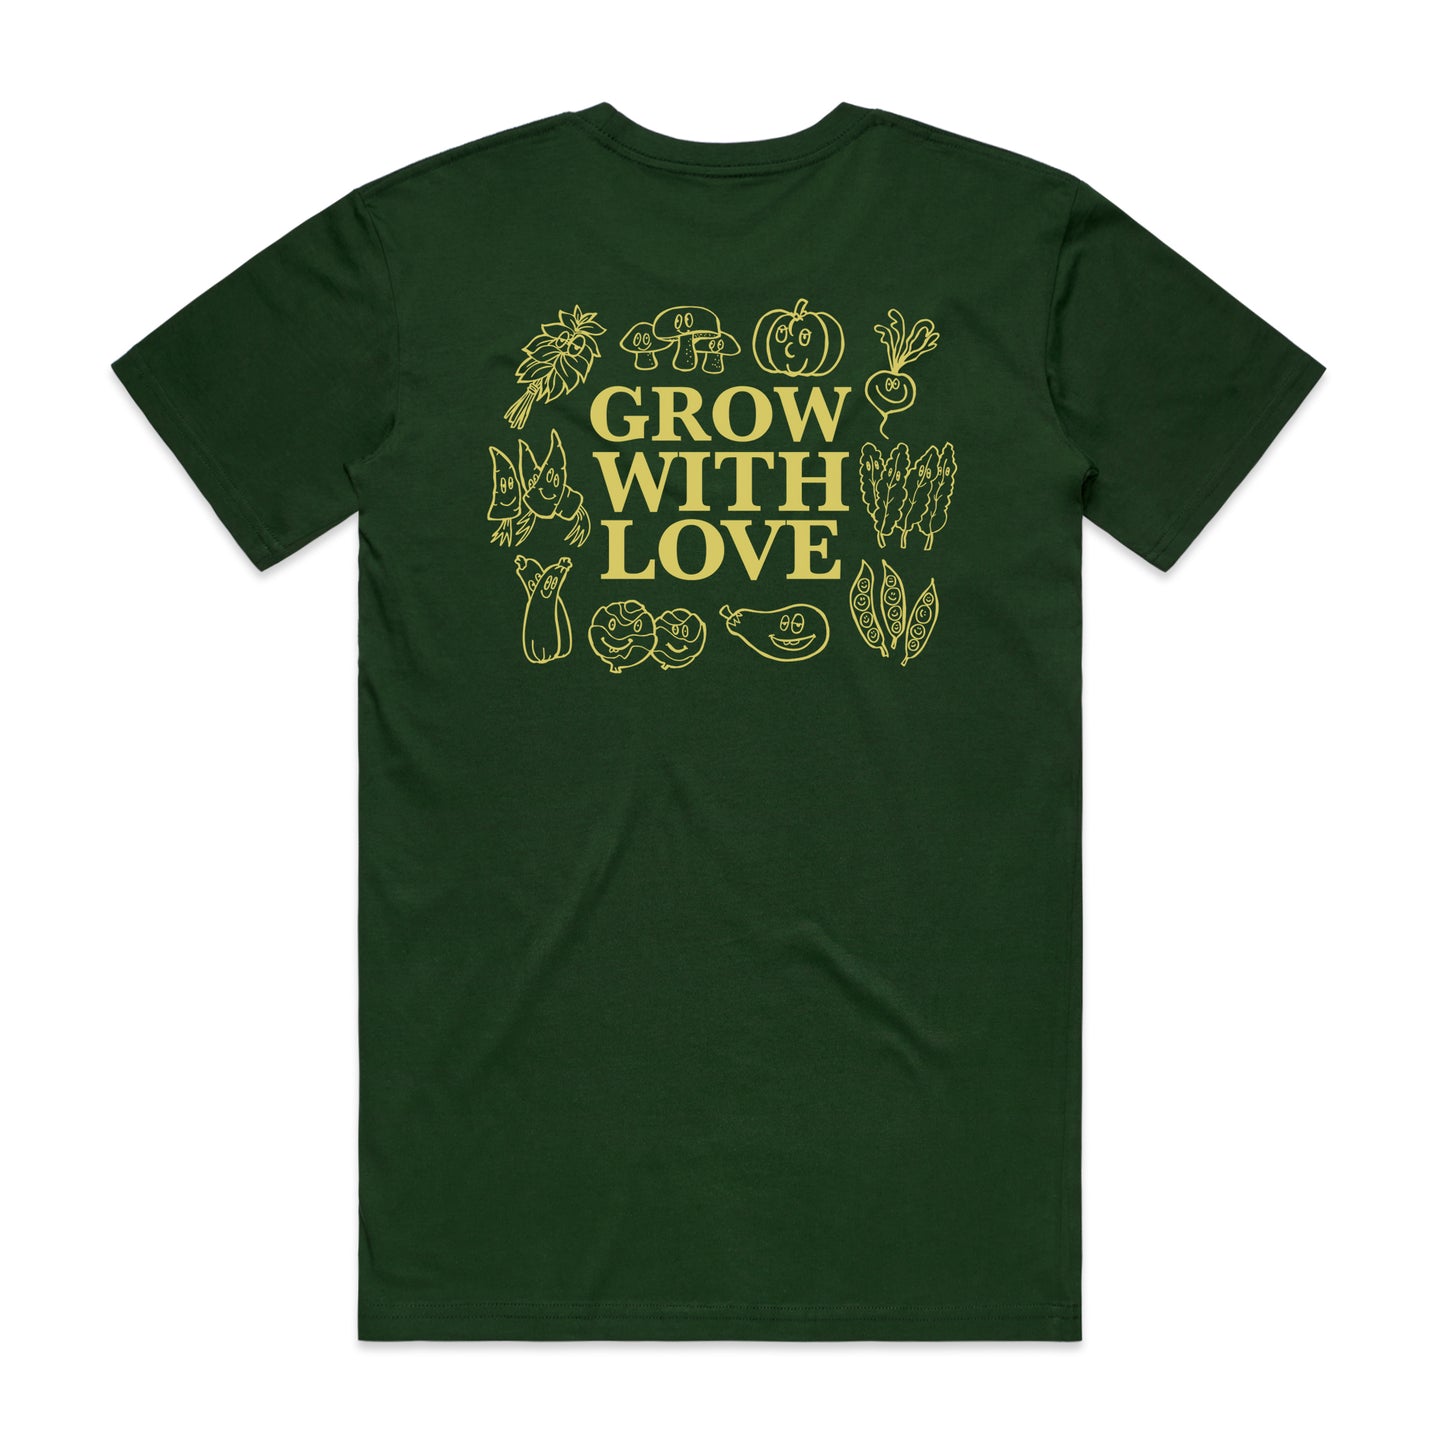 WT "Grow With Love" Forrest Green T-shirt